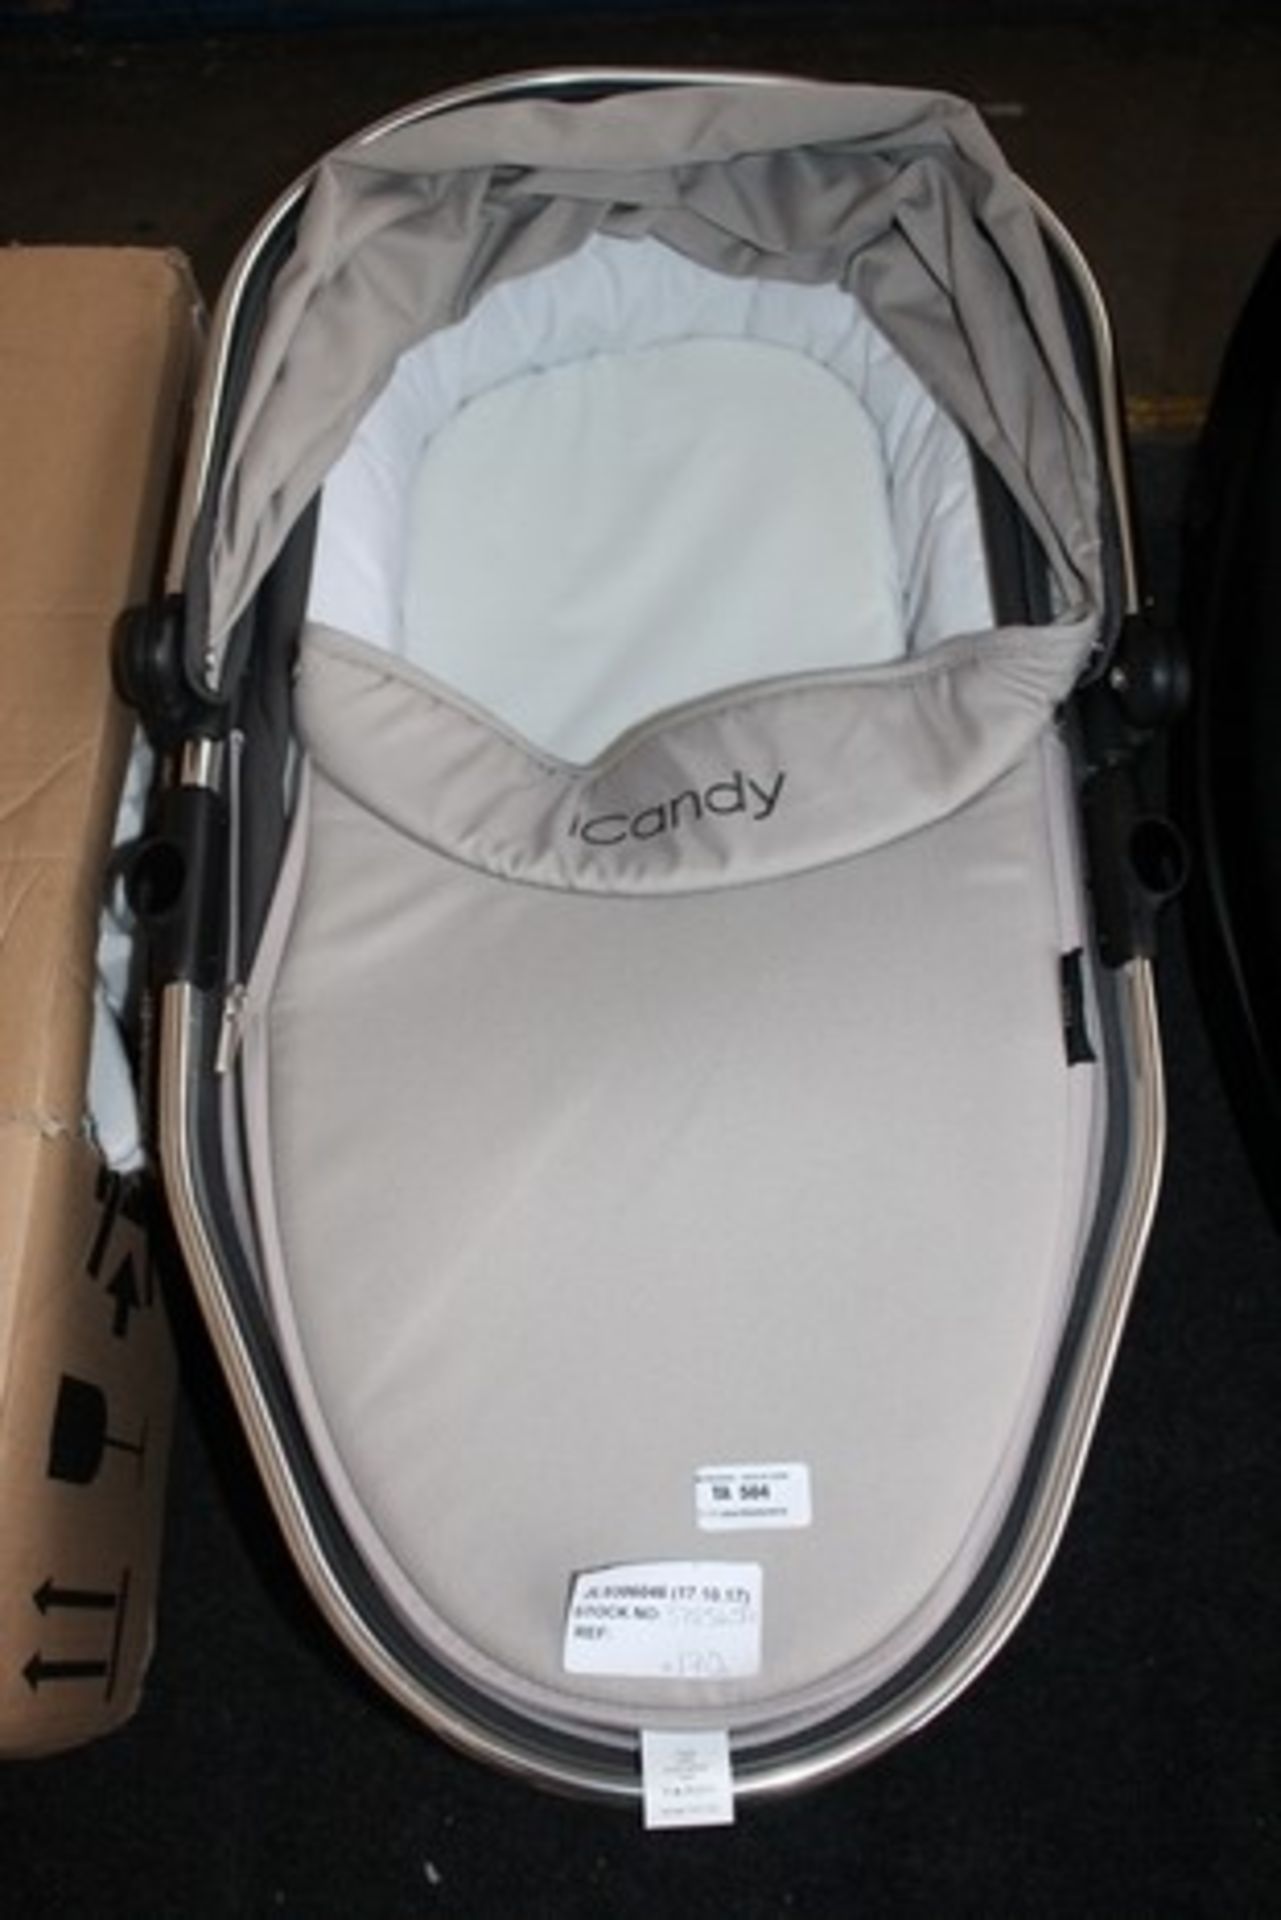 1X I CANDY CARRY COT RRP £160 (JL-9306046) (17.10.17) (3785659)